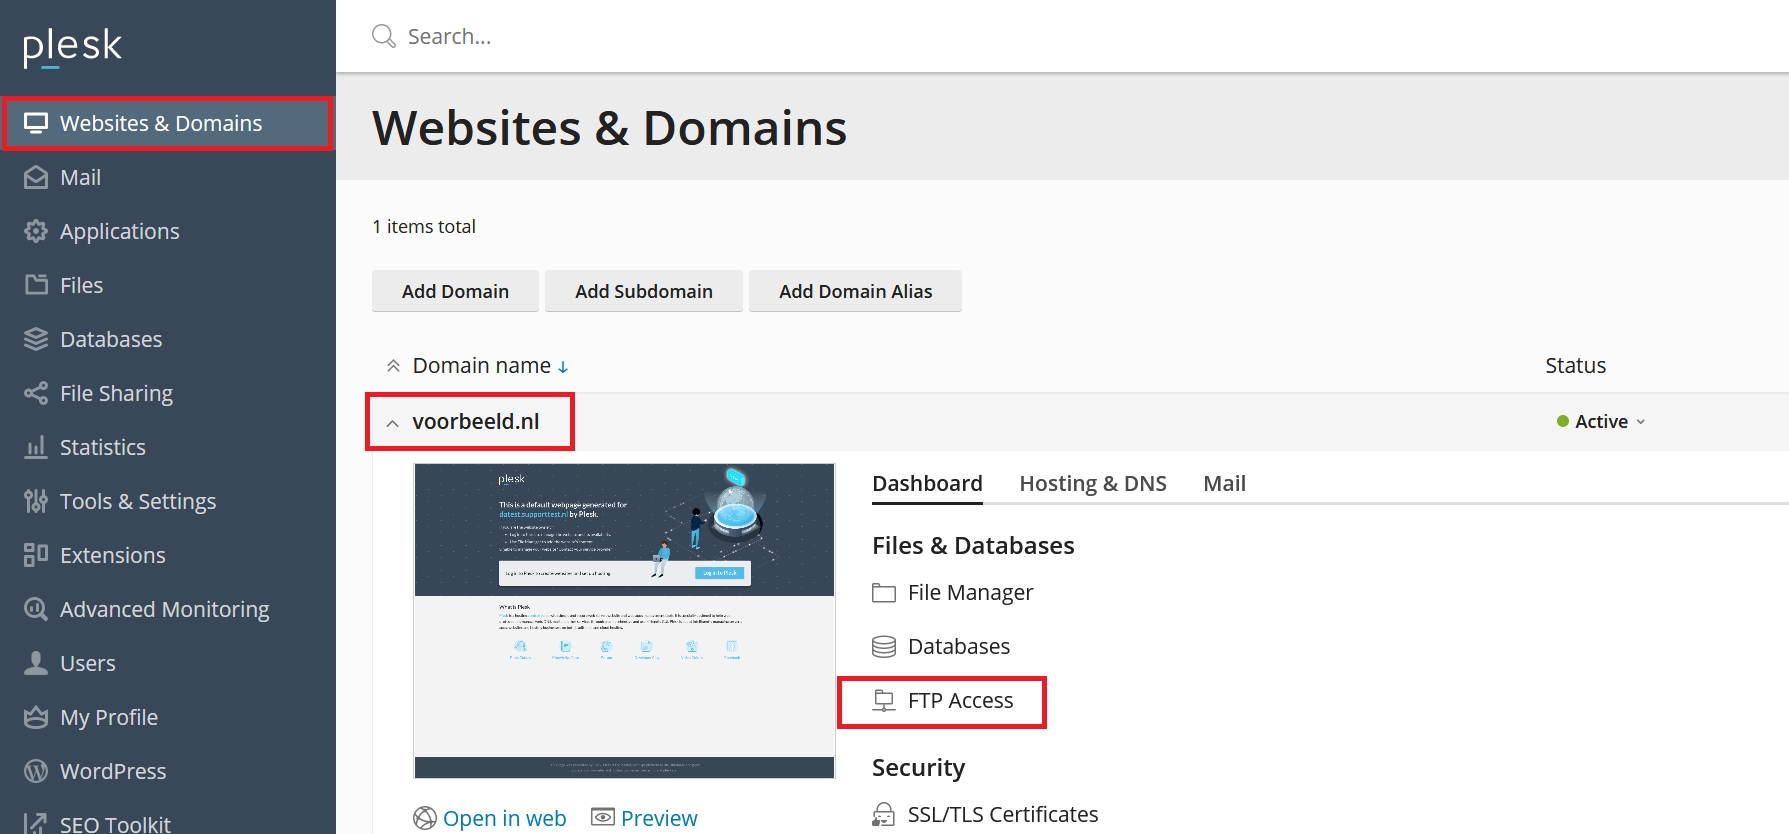 plesk webhosting and domains - ftp access